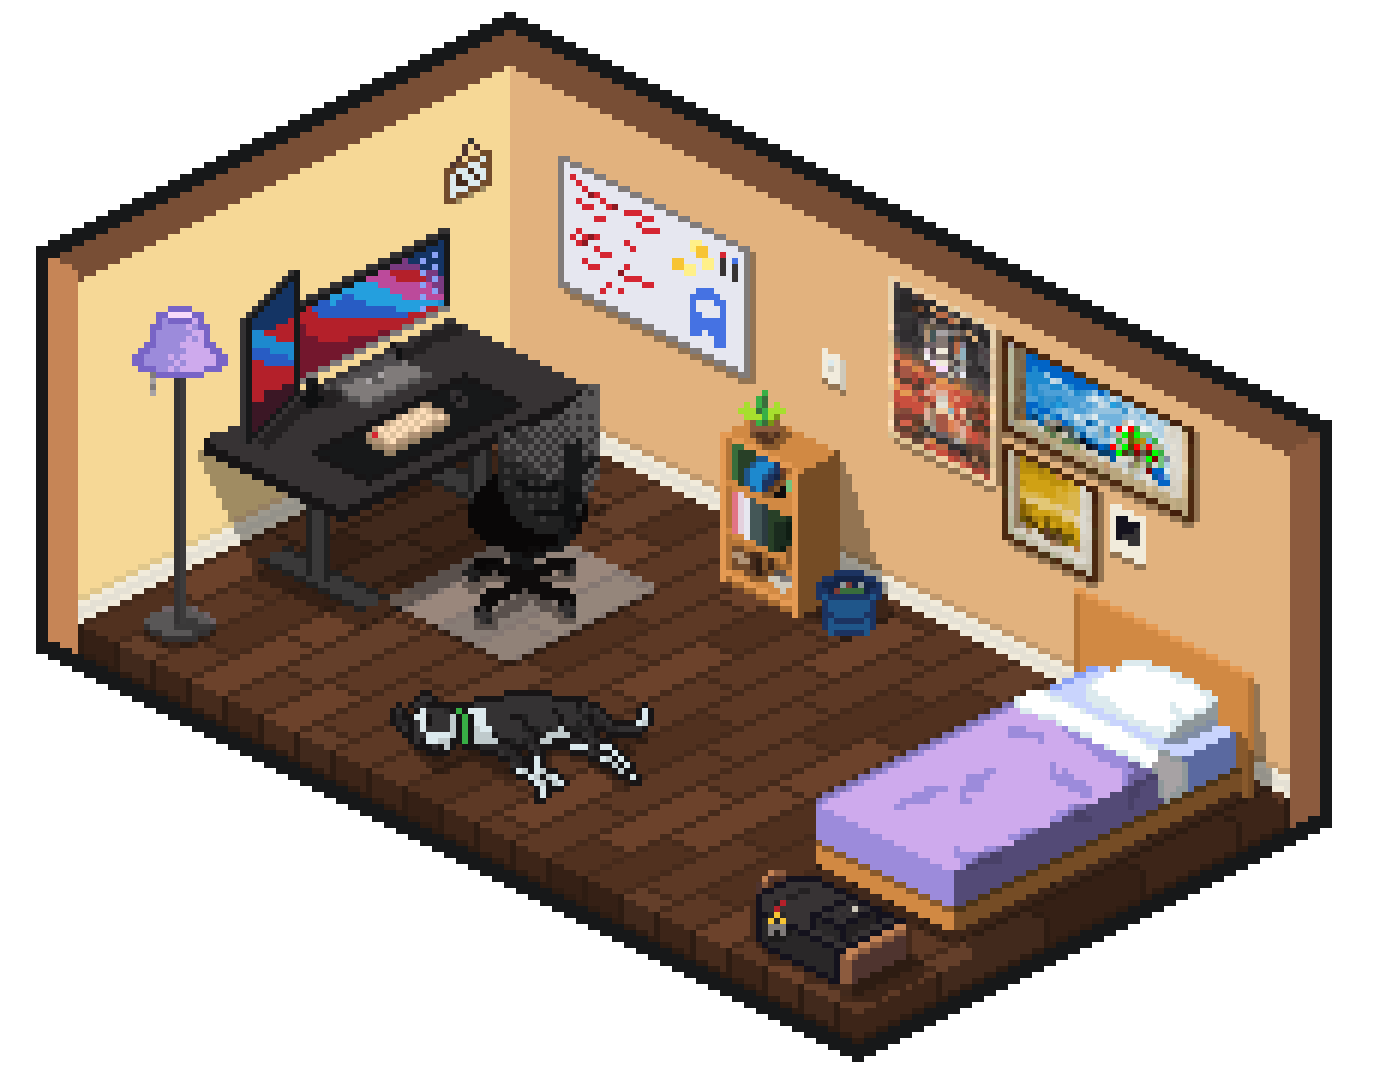 my room in pixel art. ft. my dog tilly :)